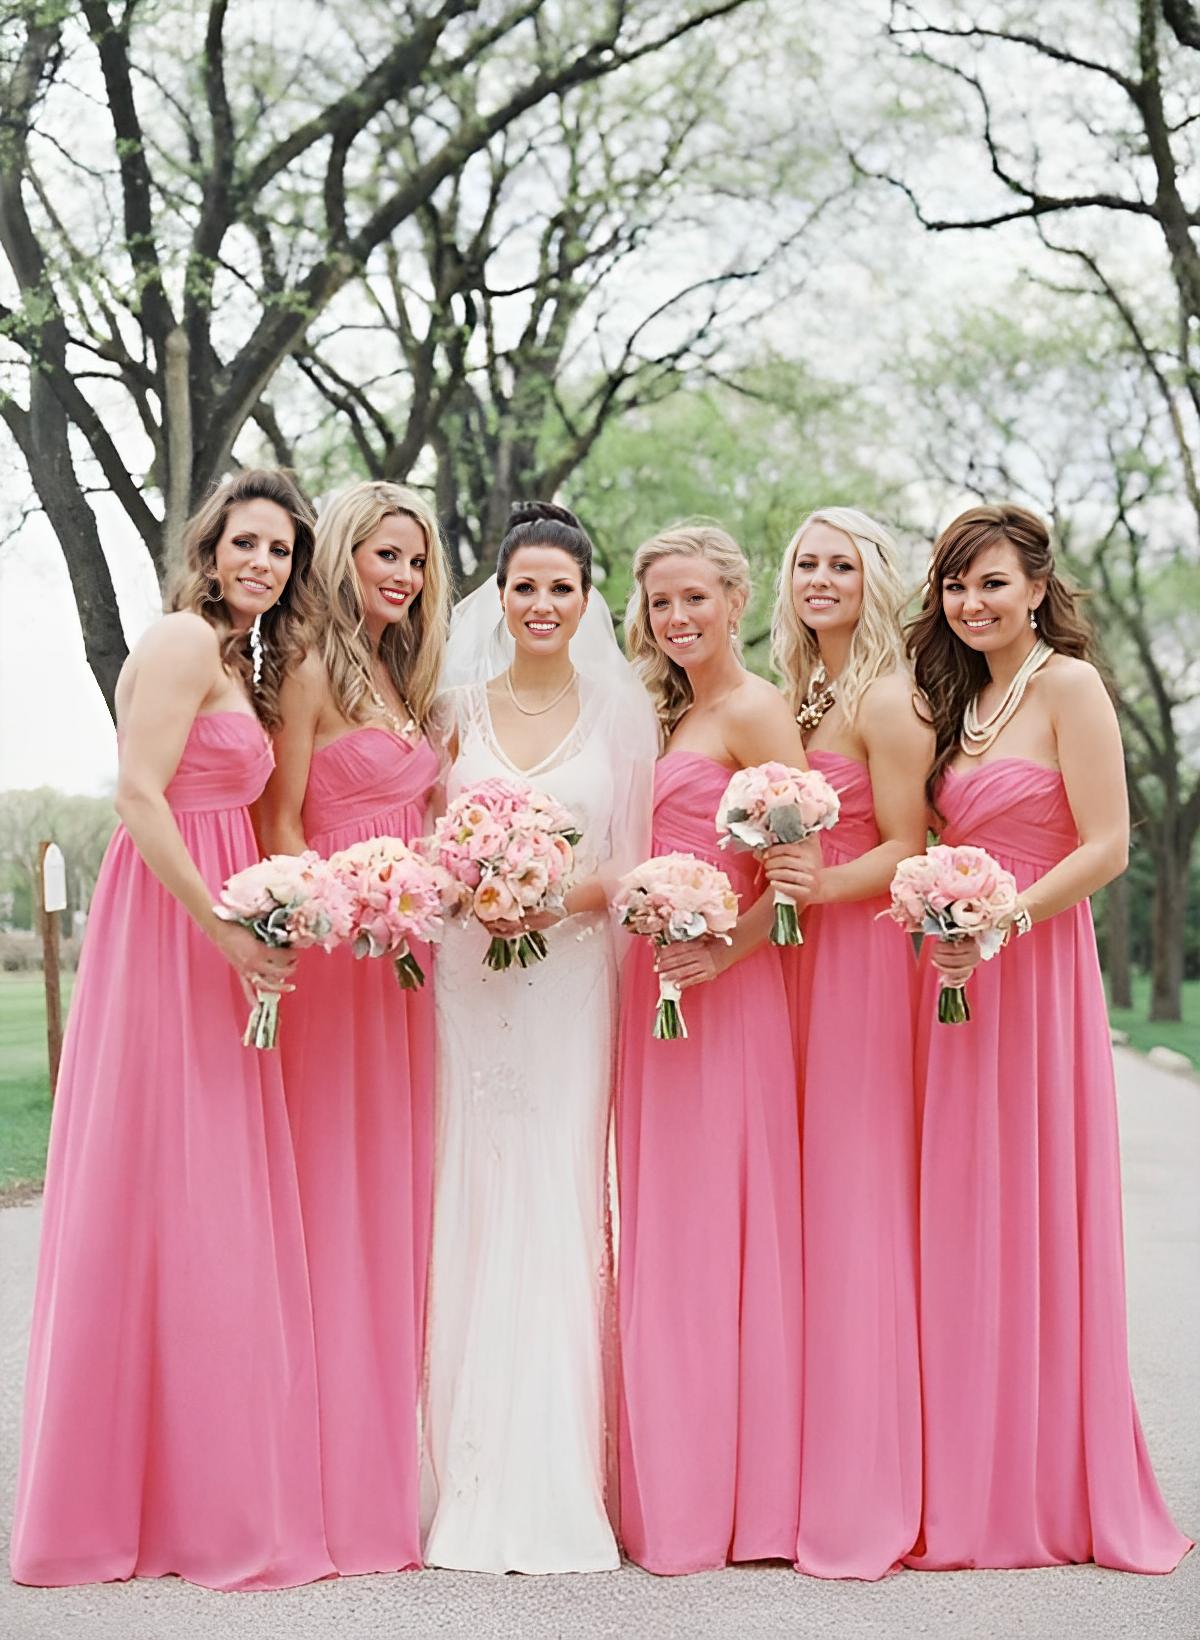 A-Line/Princess Strapless Chiffon floor-Length Bridesmaid Dresses With Ruffle Split Front